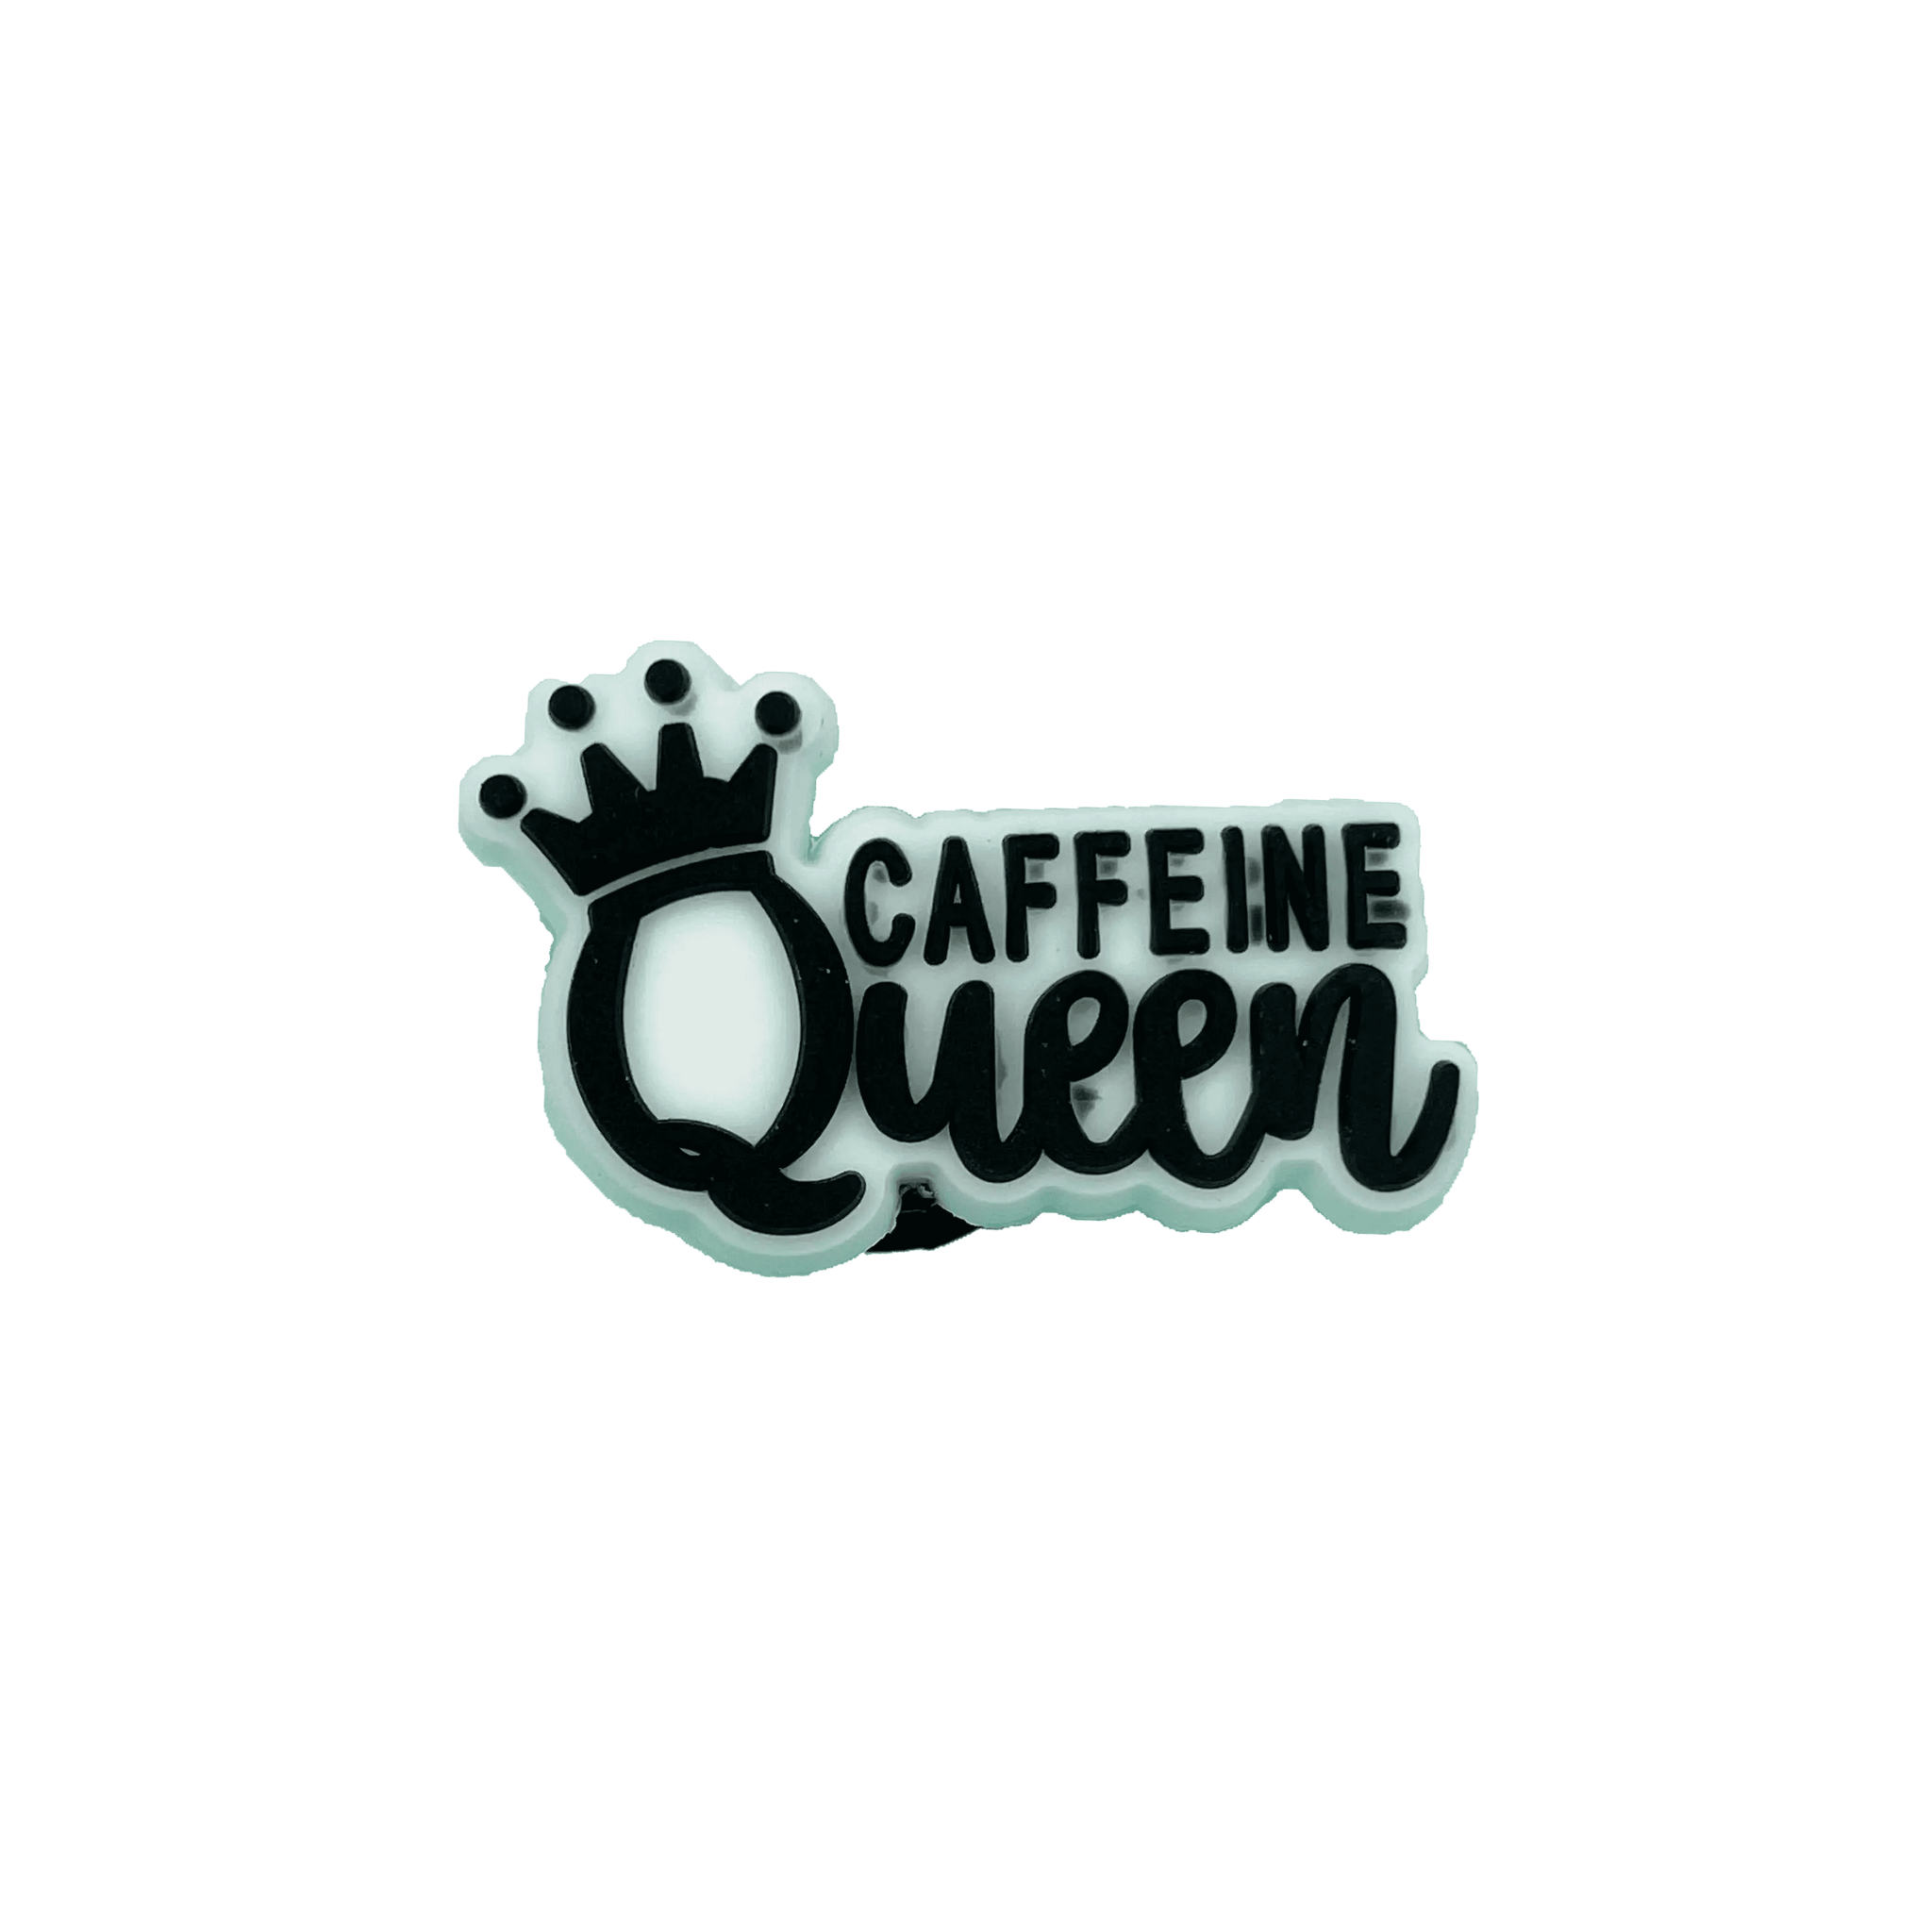 Caffeine Queen Charm Charms By Prince